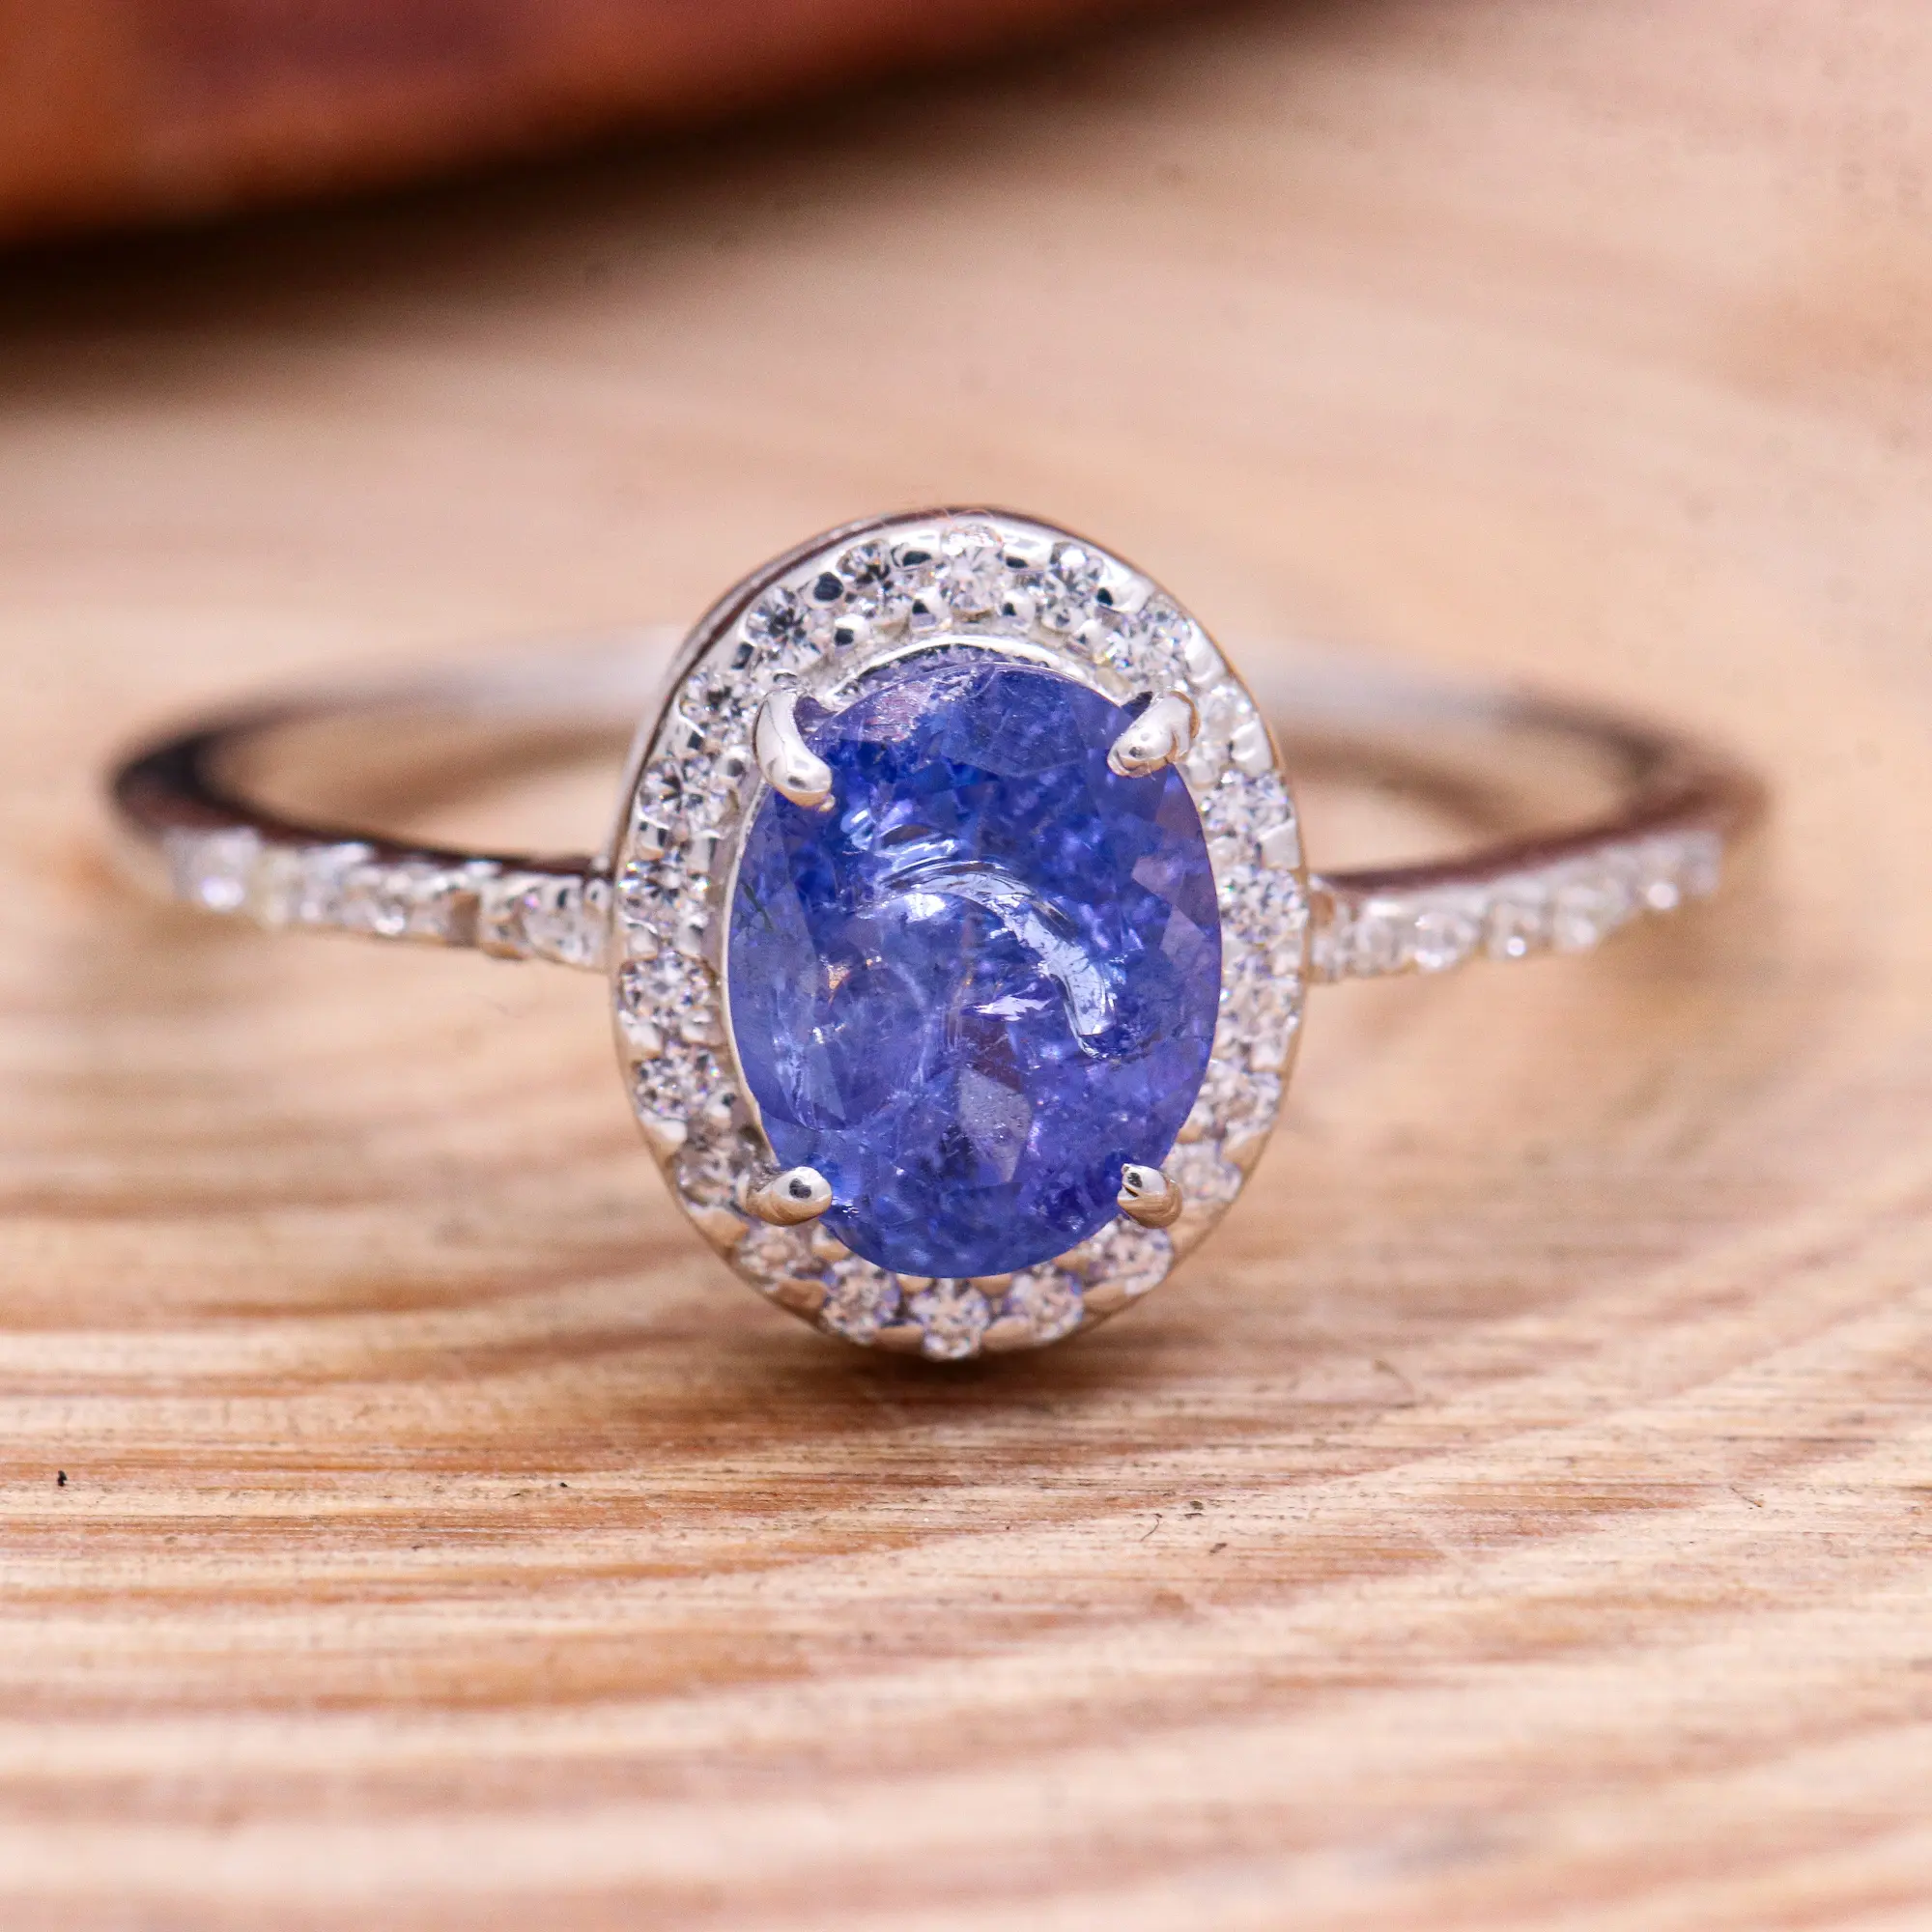 Natural Tanzanite Oval Cut Gemstone With Cubic Zircon 925 Sterling Silver Handmade Ring Fashion Jewelry Birthstone For Wholesale